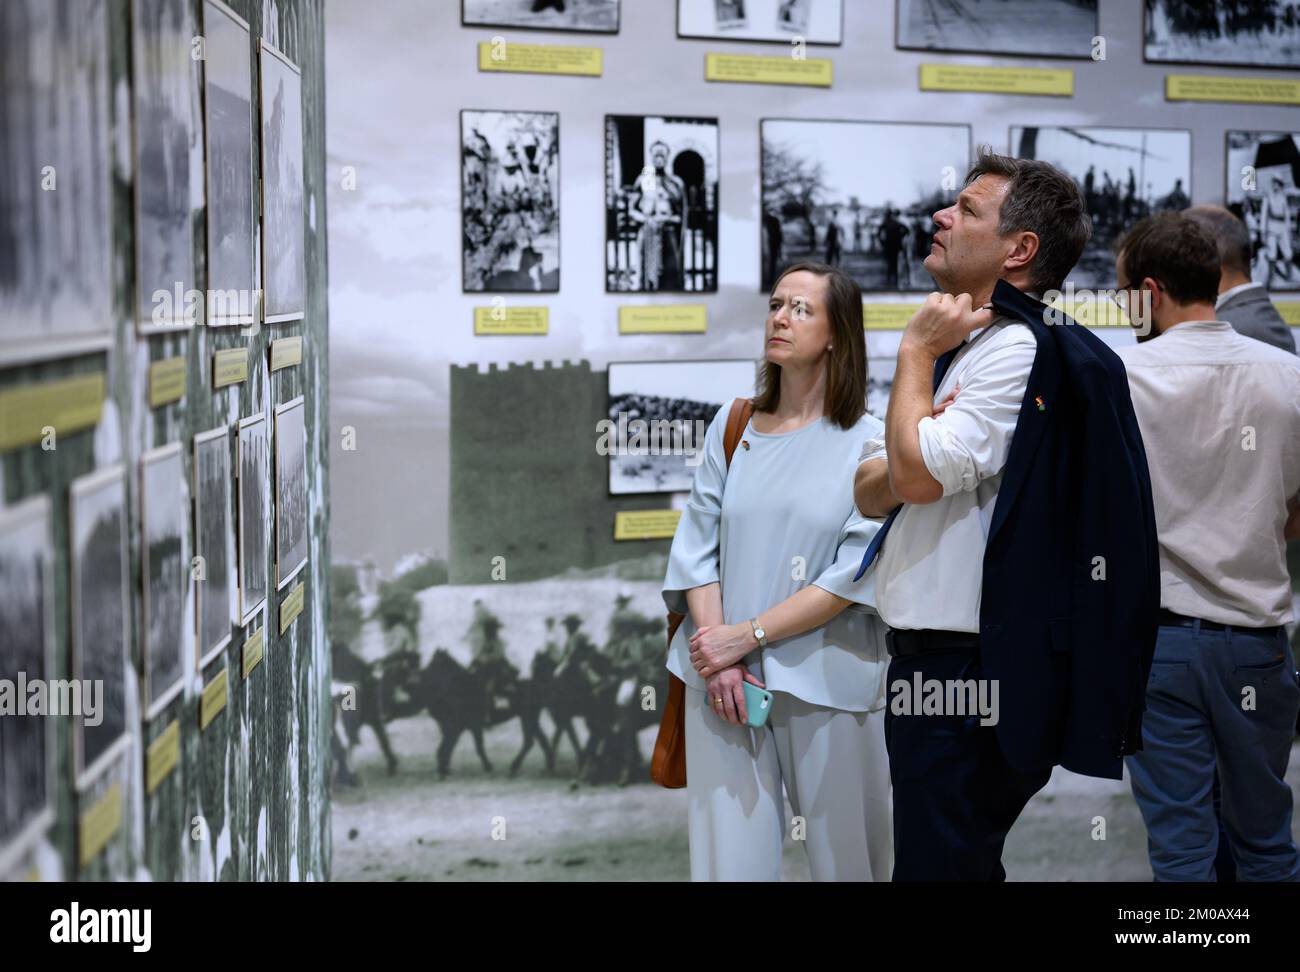 Windhuk, Namibia. 05th Dec, 2022. Robert Habeck (Bündnis 90/Die Grünen), Federal Minister for Economic Affairs and Climate Protection, looks at the exhibition at the Namibian Independence Museum together with his spokesperson, Nicola Kabel. Credit: Bernd von Jutrczenka/dpa/Alamy Live News Stock Photo